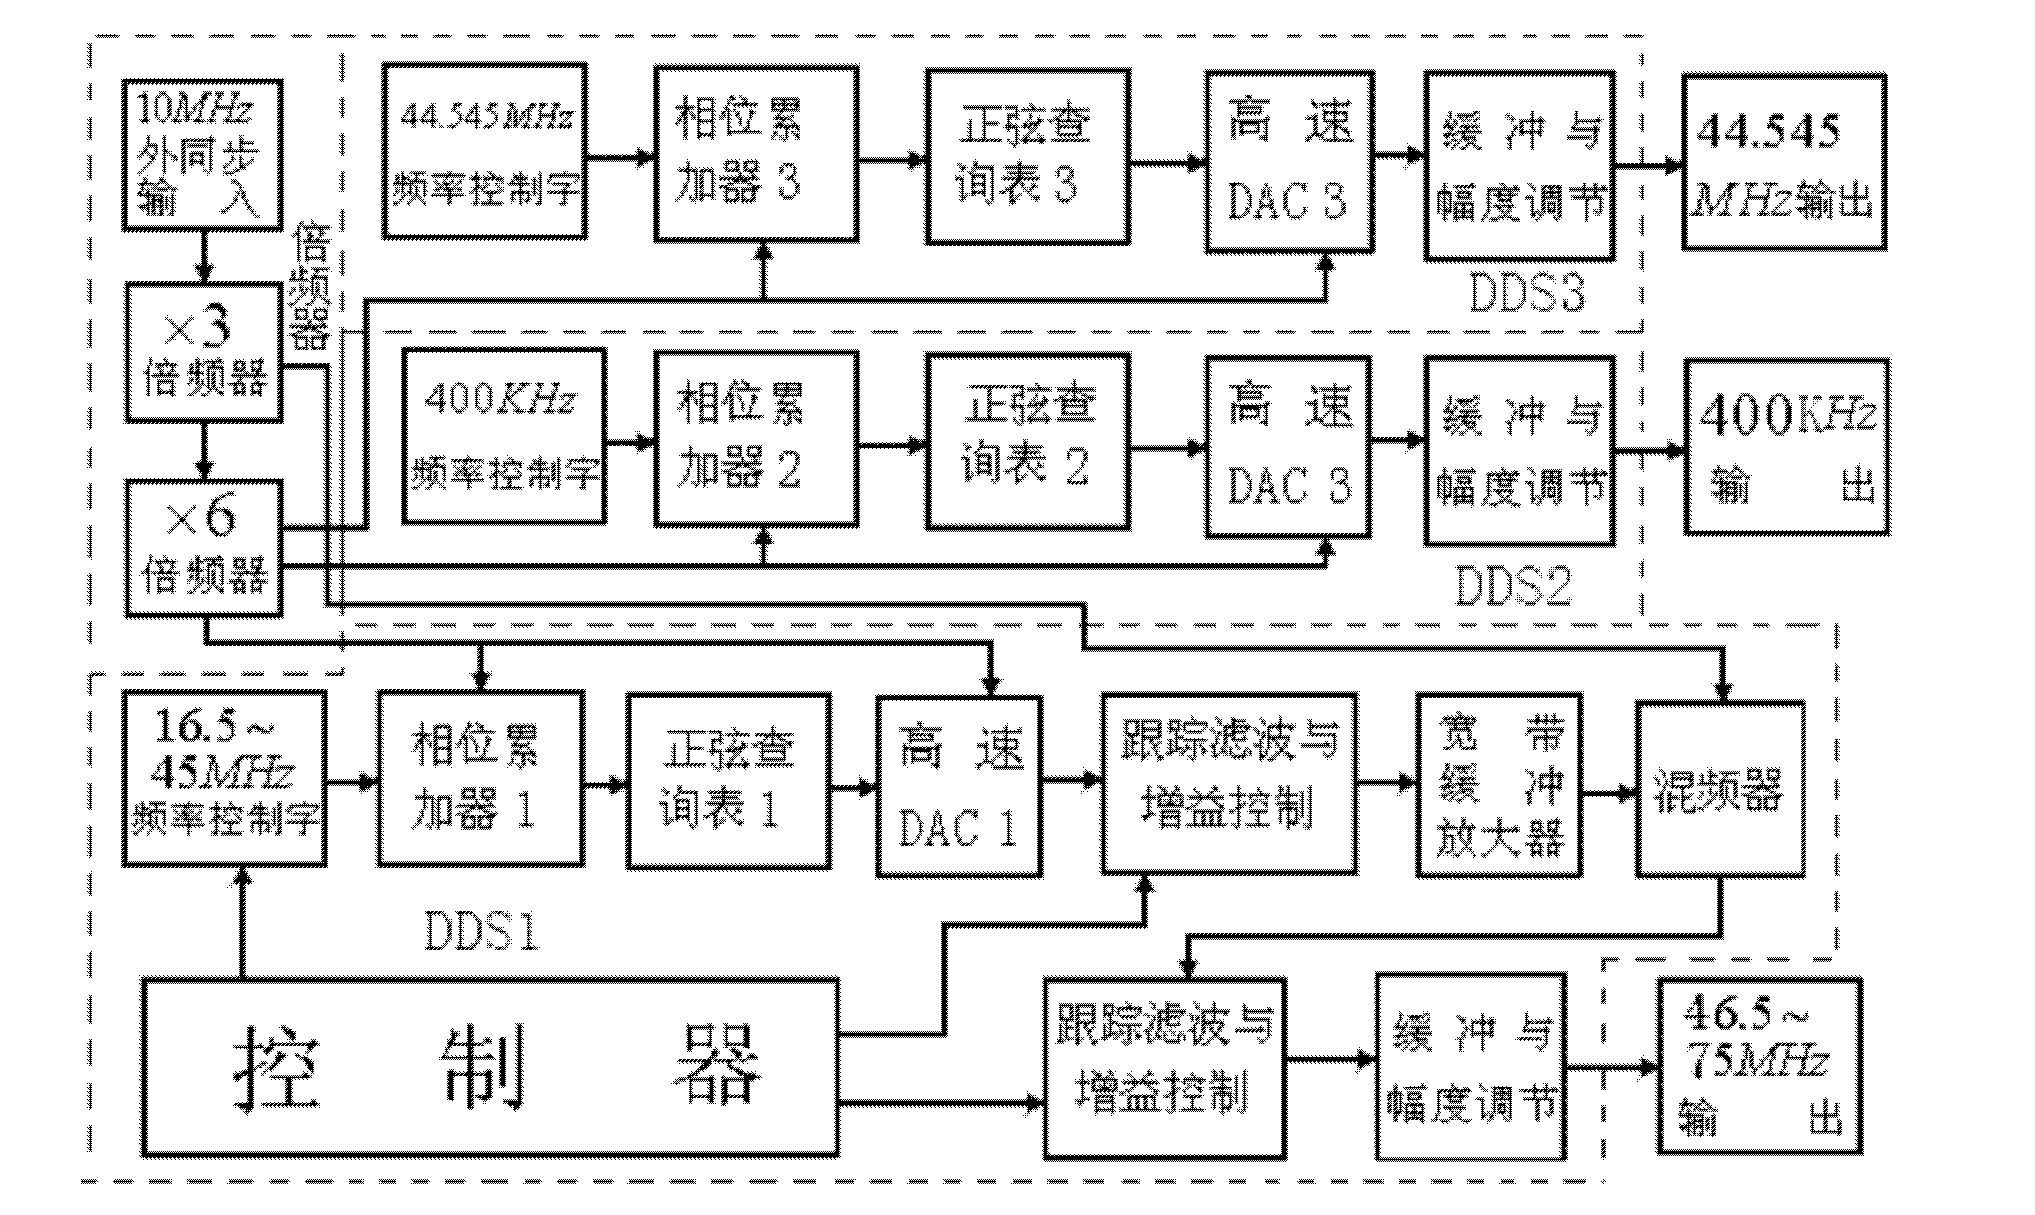 High/intermediate-frequency front-end circuit of digital short-wave receiver